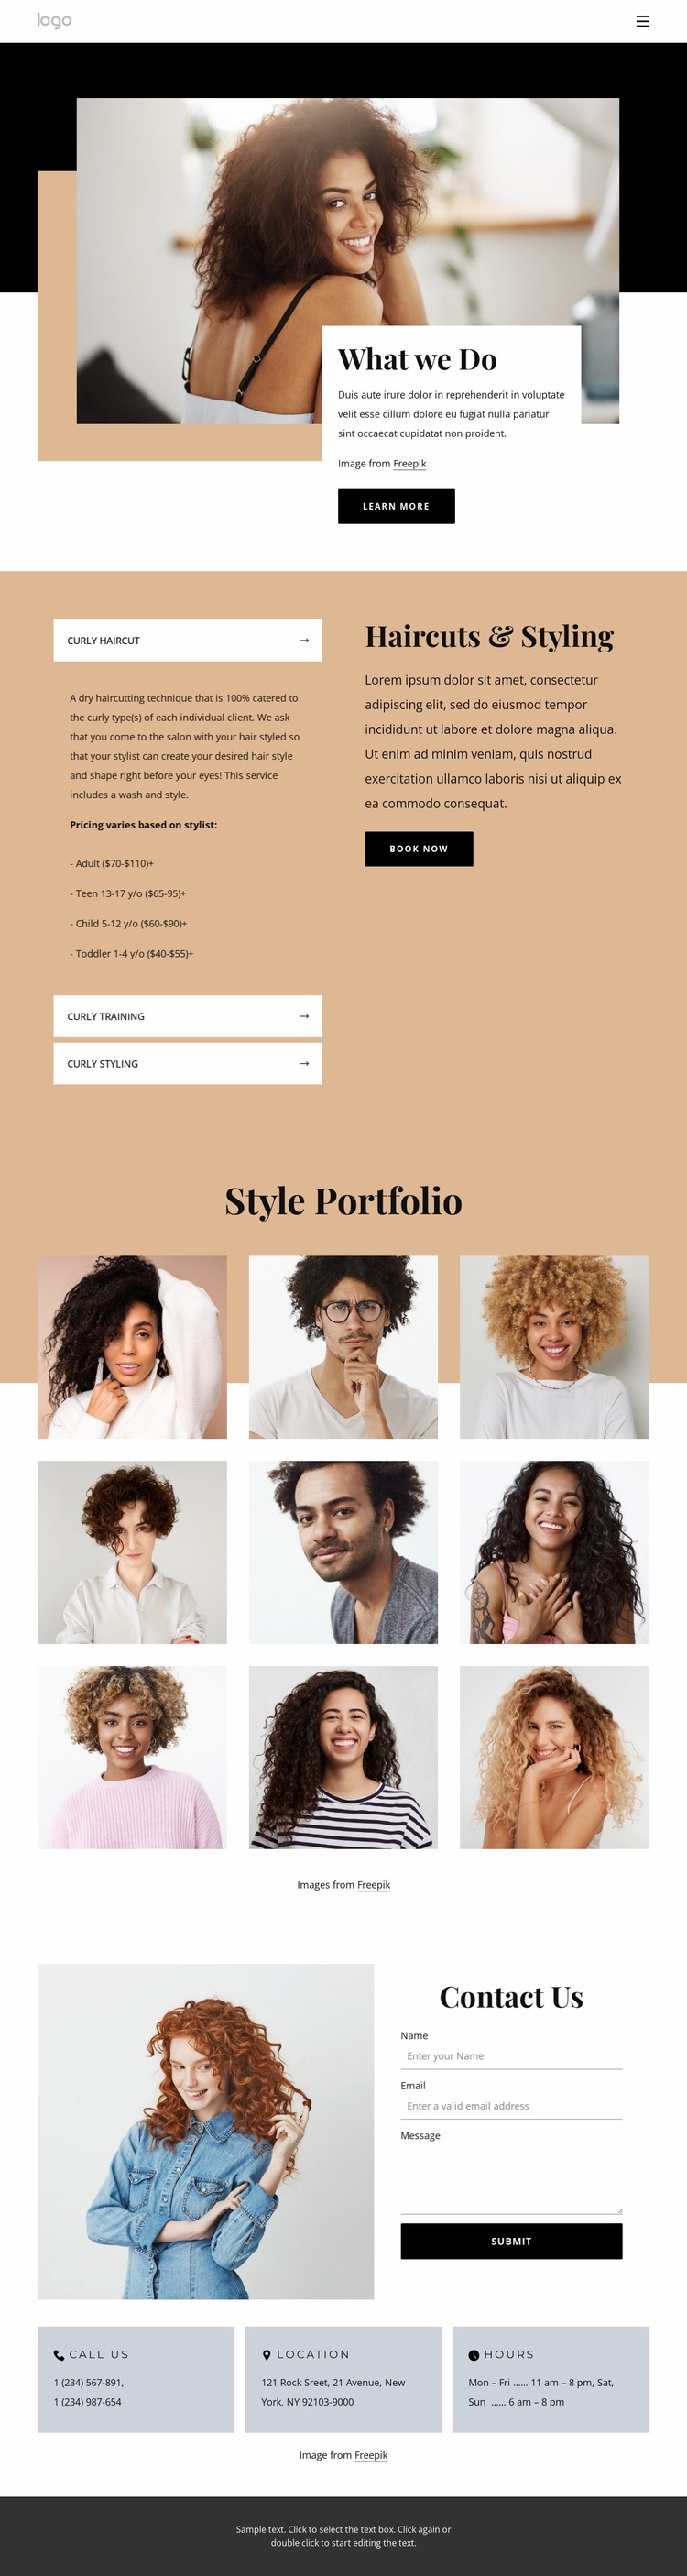 Local curly hair specialists Website Mockup